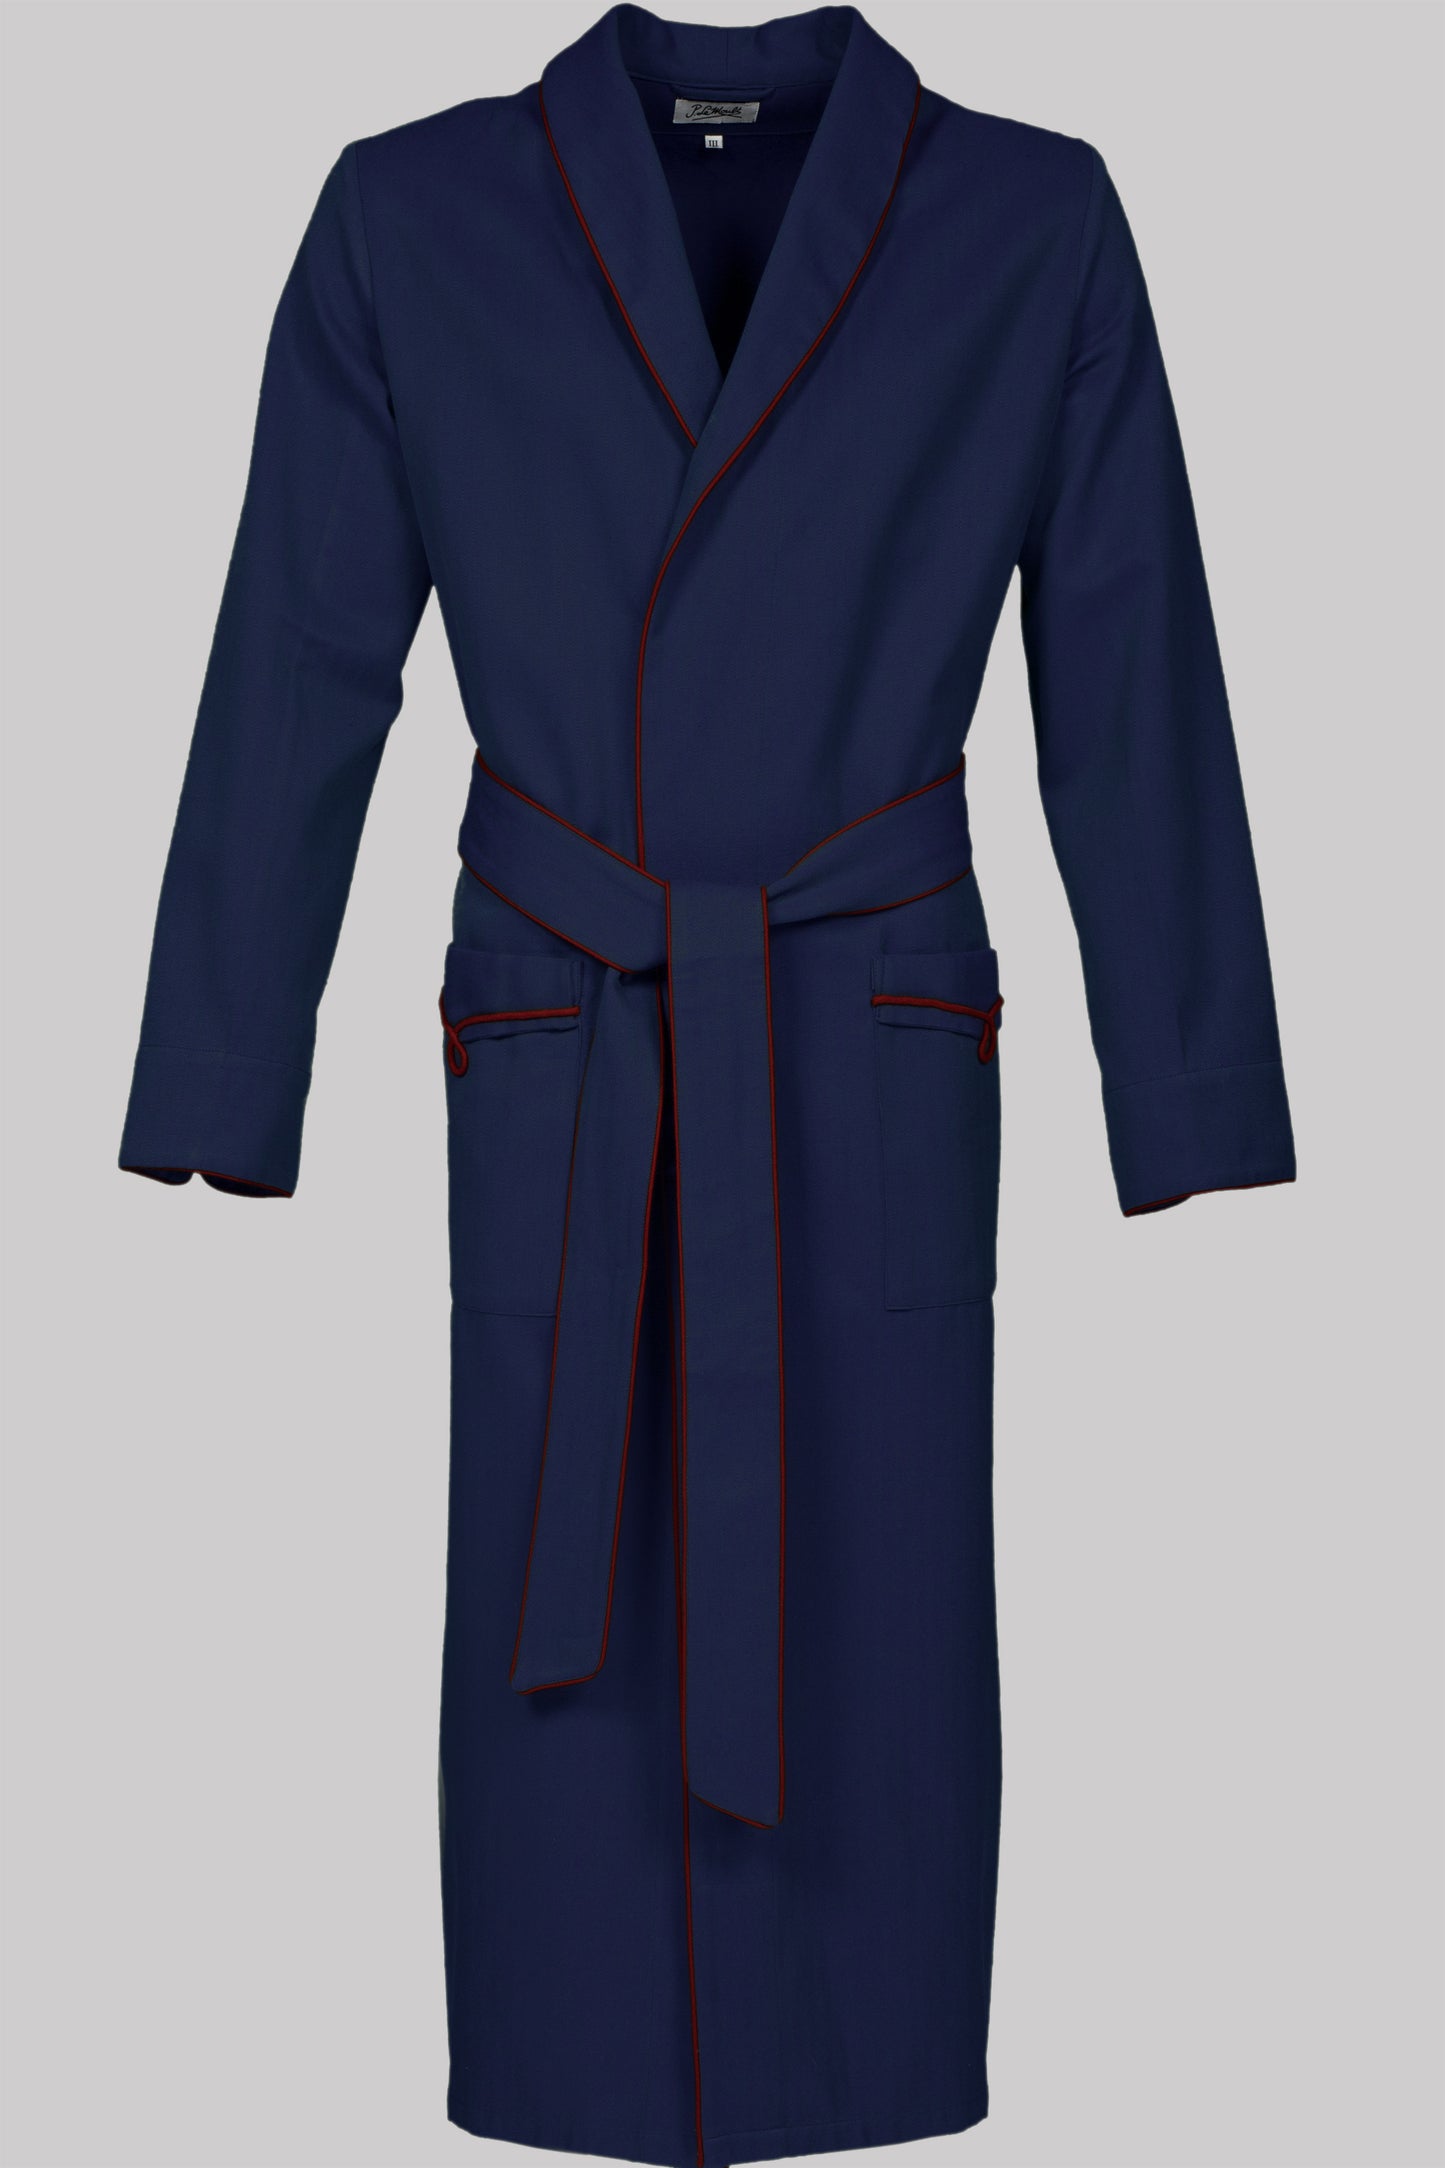 DRESSING-GOWN BLUE with burgundy braiding 100% COTTON Herringbone-Thick, bi-colour-weave, brushed-inside